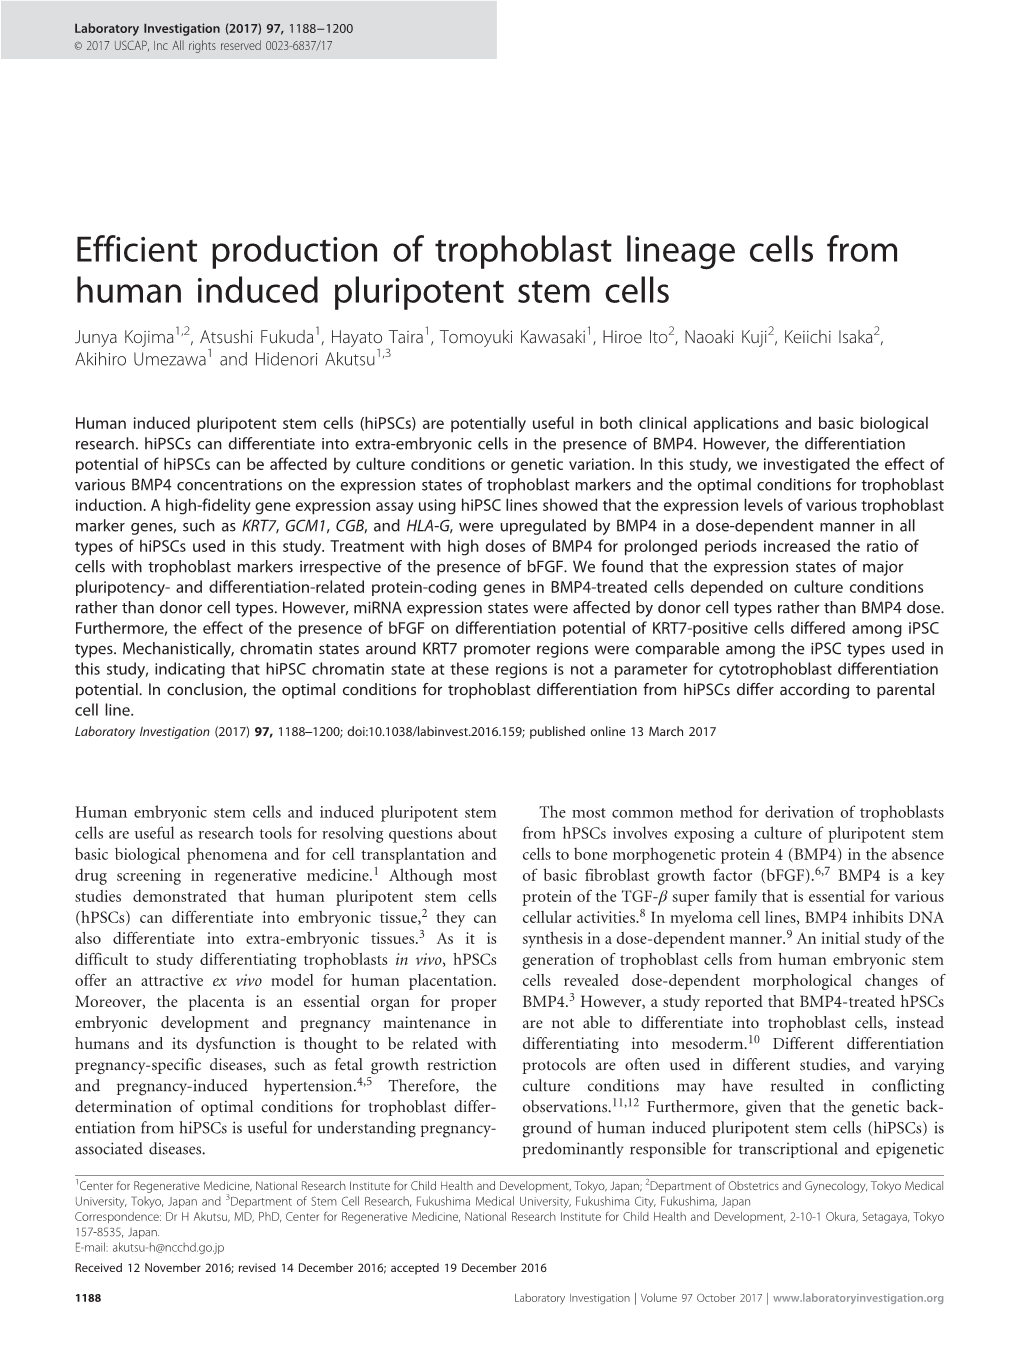 Efficient Production of Trophoblast Lineage Cells from Human Induced